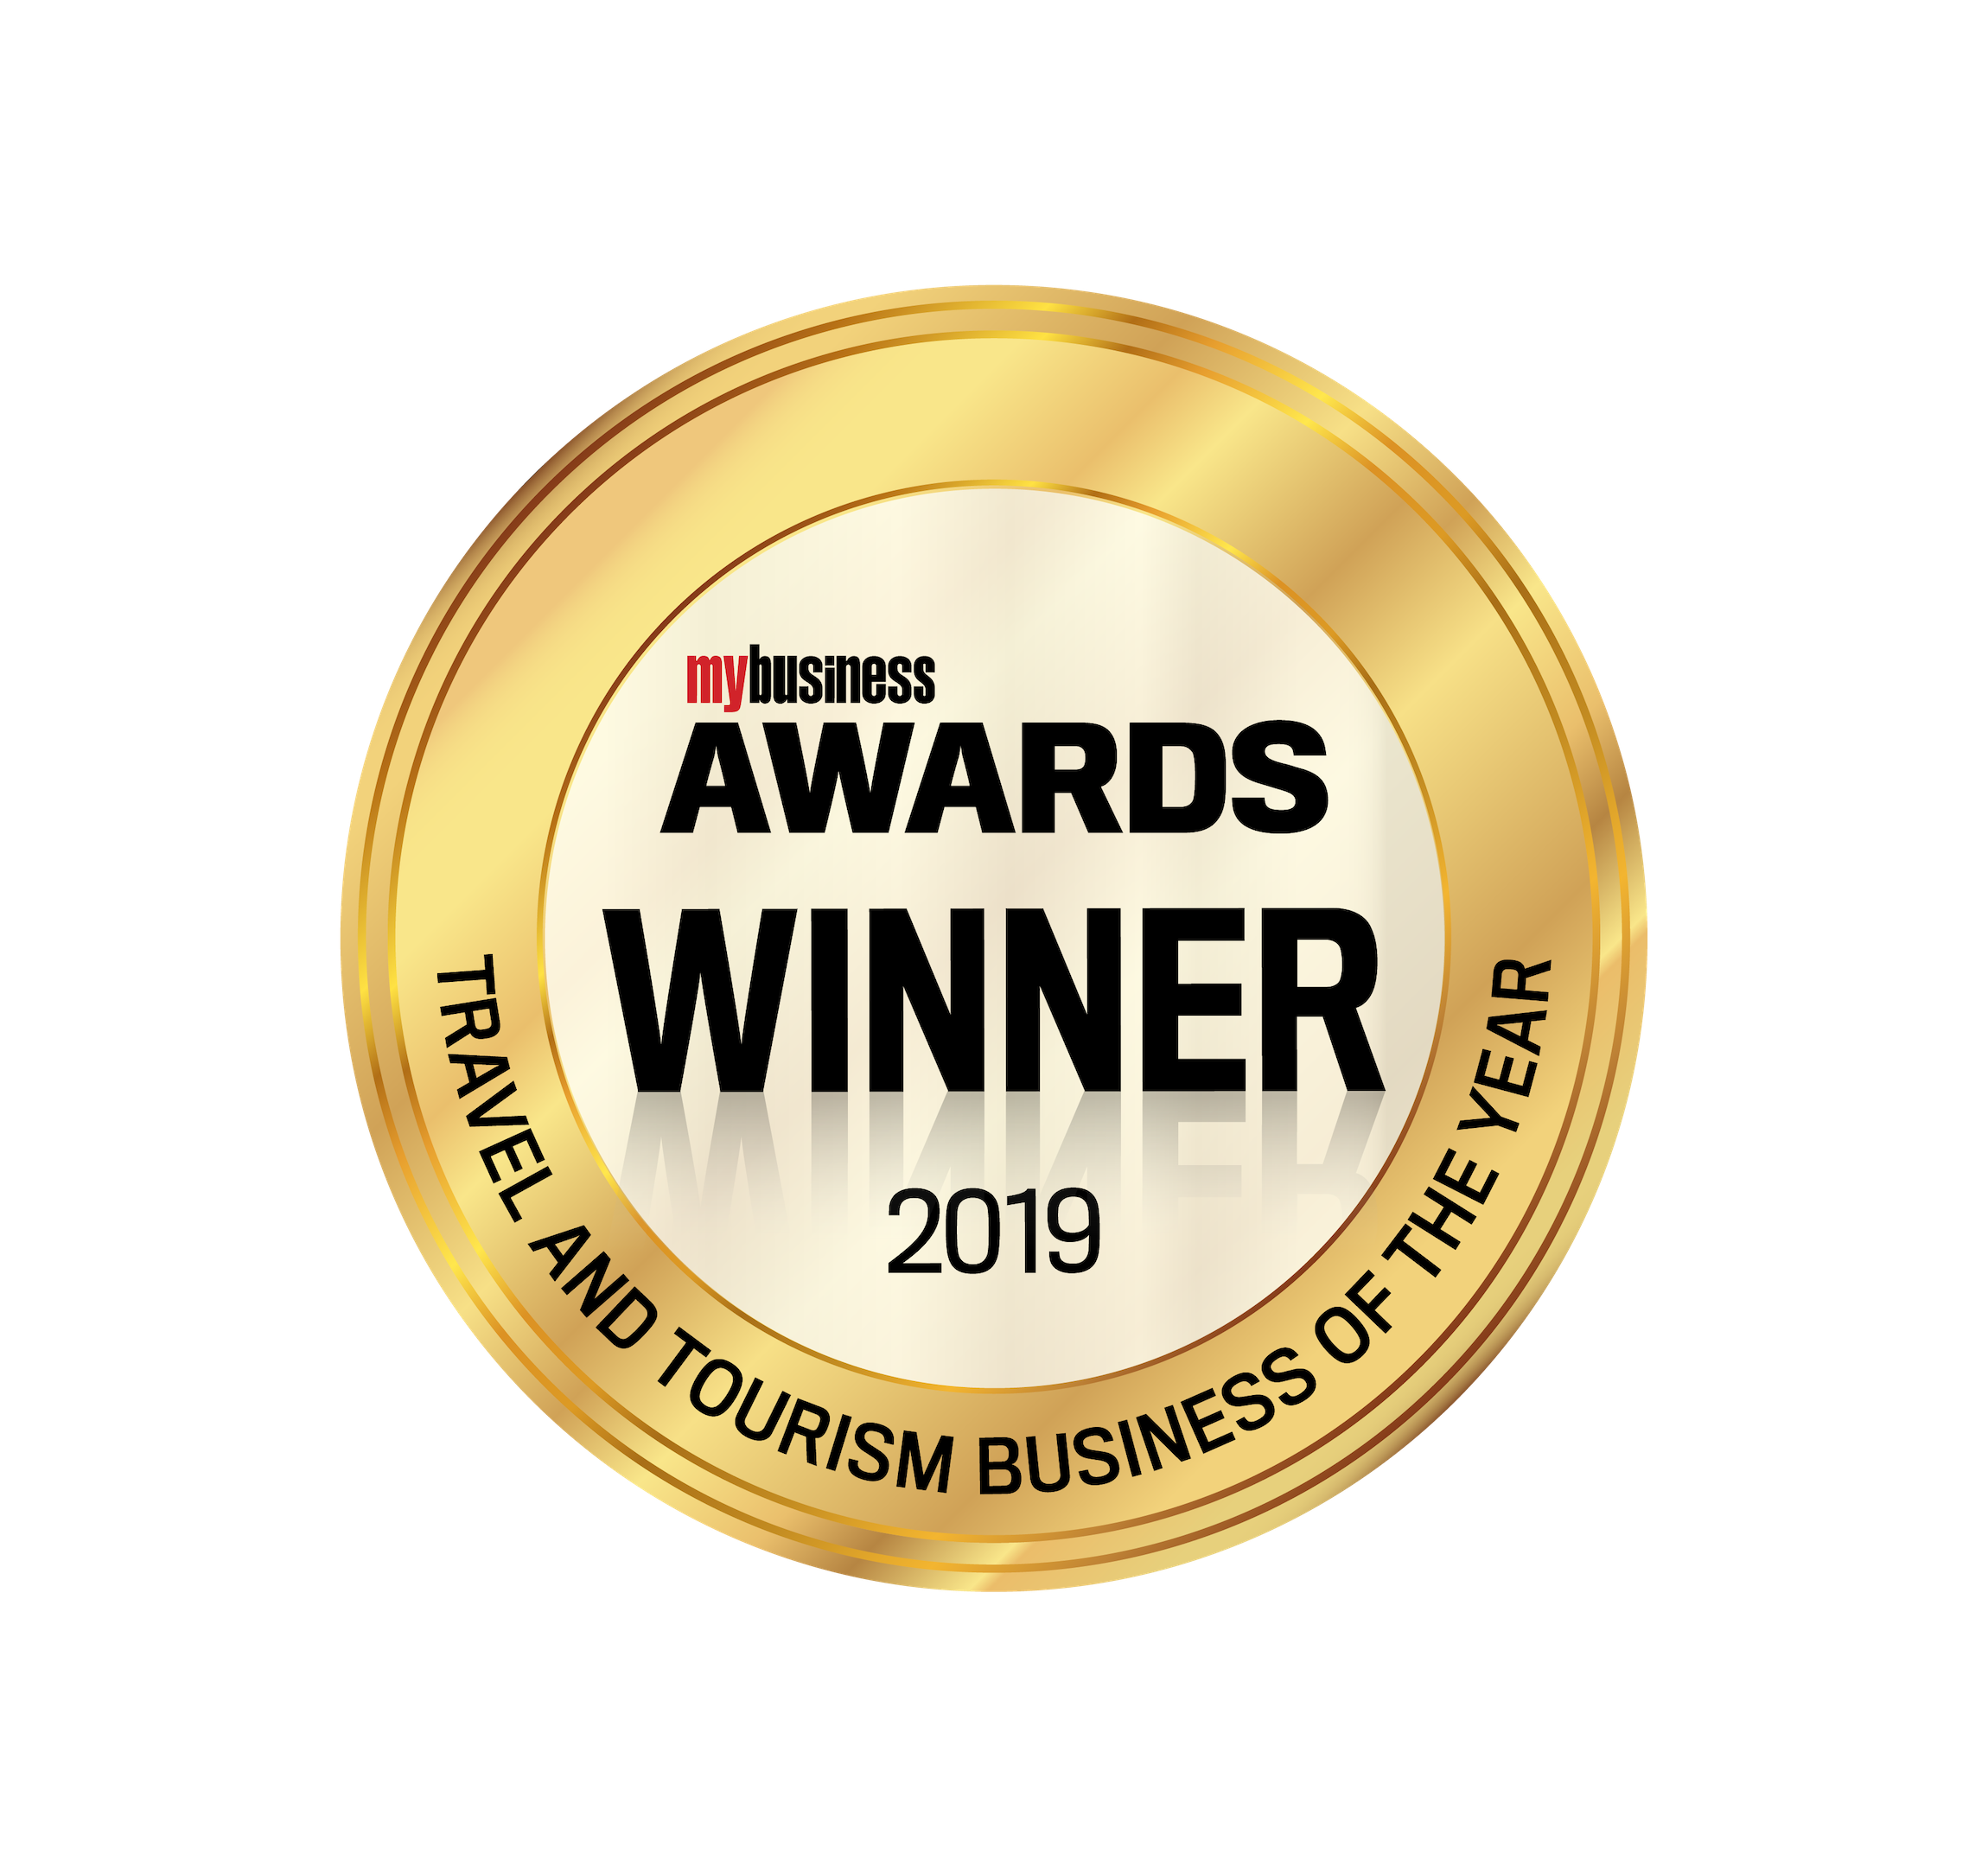 2019 Winners - TRAVEL AND TOURISM BUSINESS OF THE YEAR